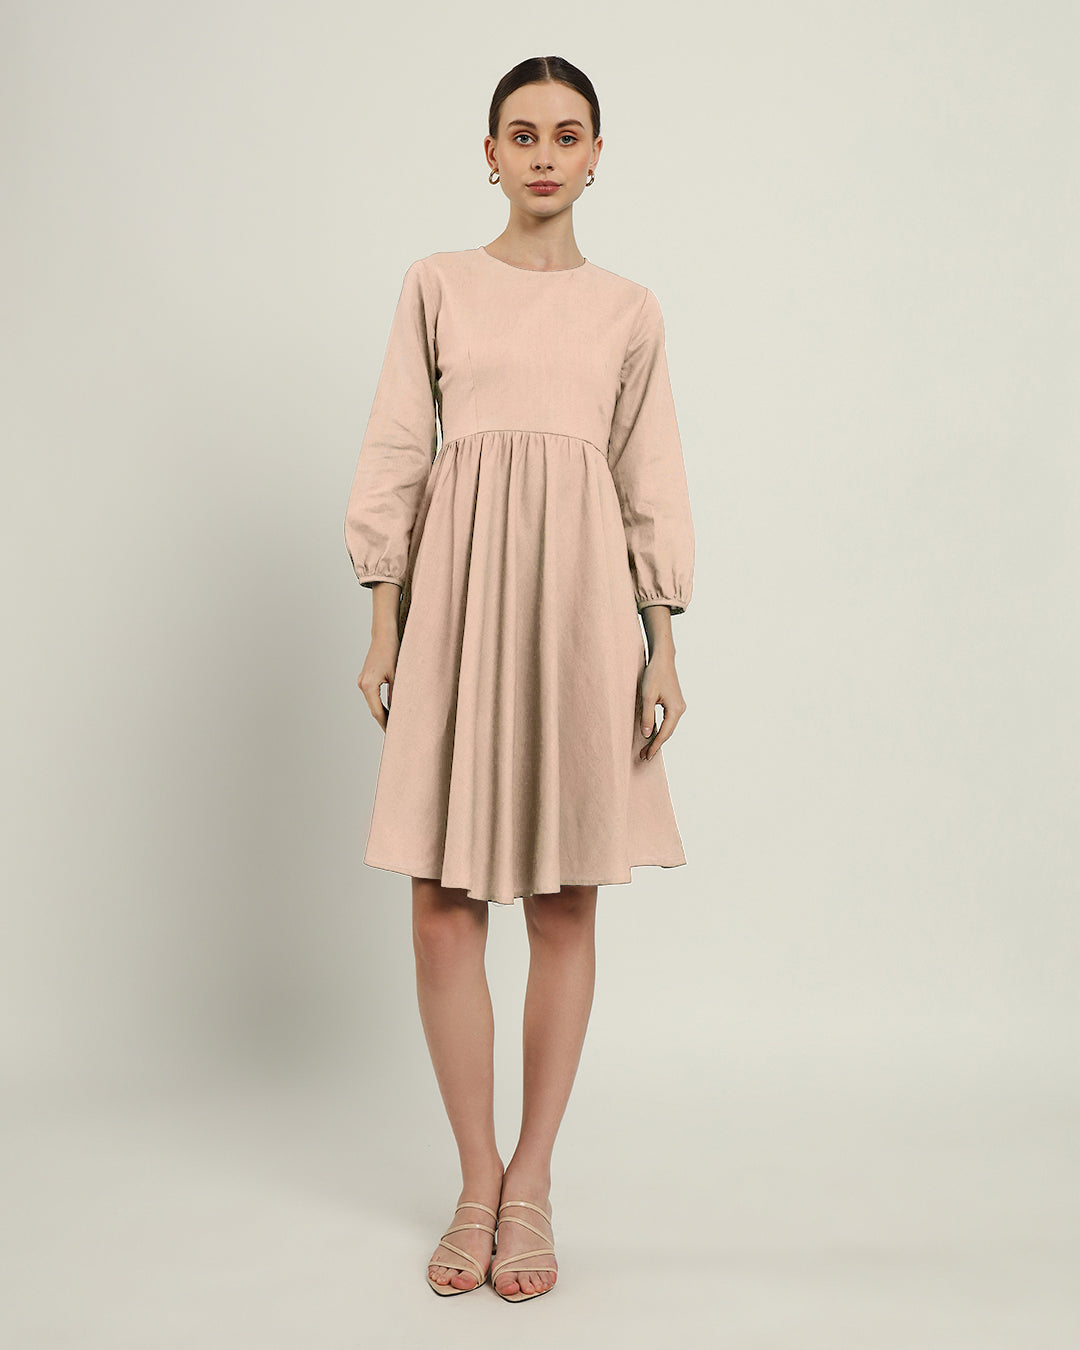 The Exeter Daisy Bisque Linen Dress